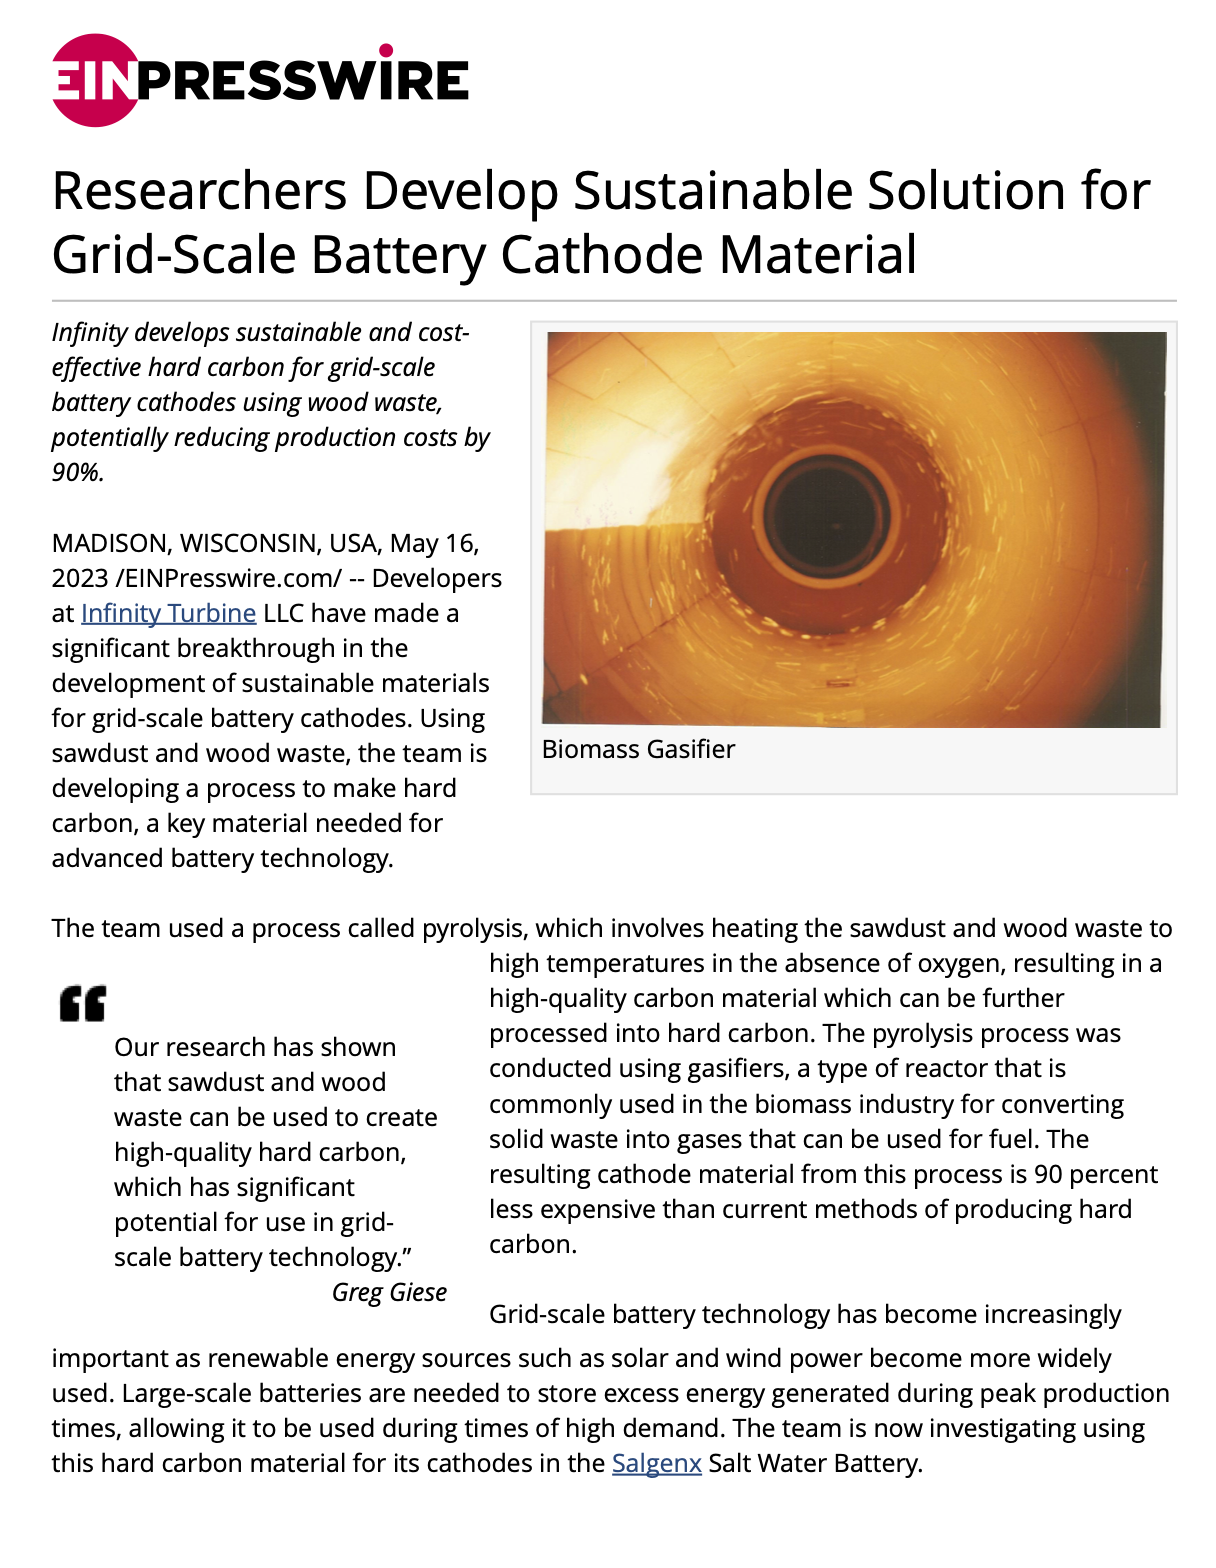 Researchers Develop Sustainable Solution for Grid-Scale Battery Cathode Material